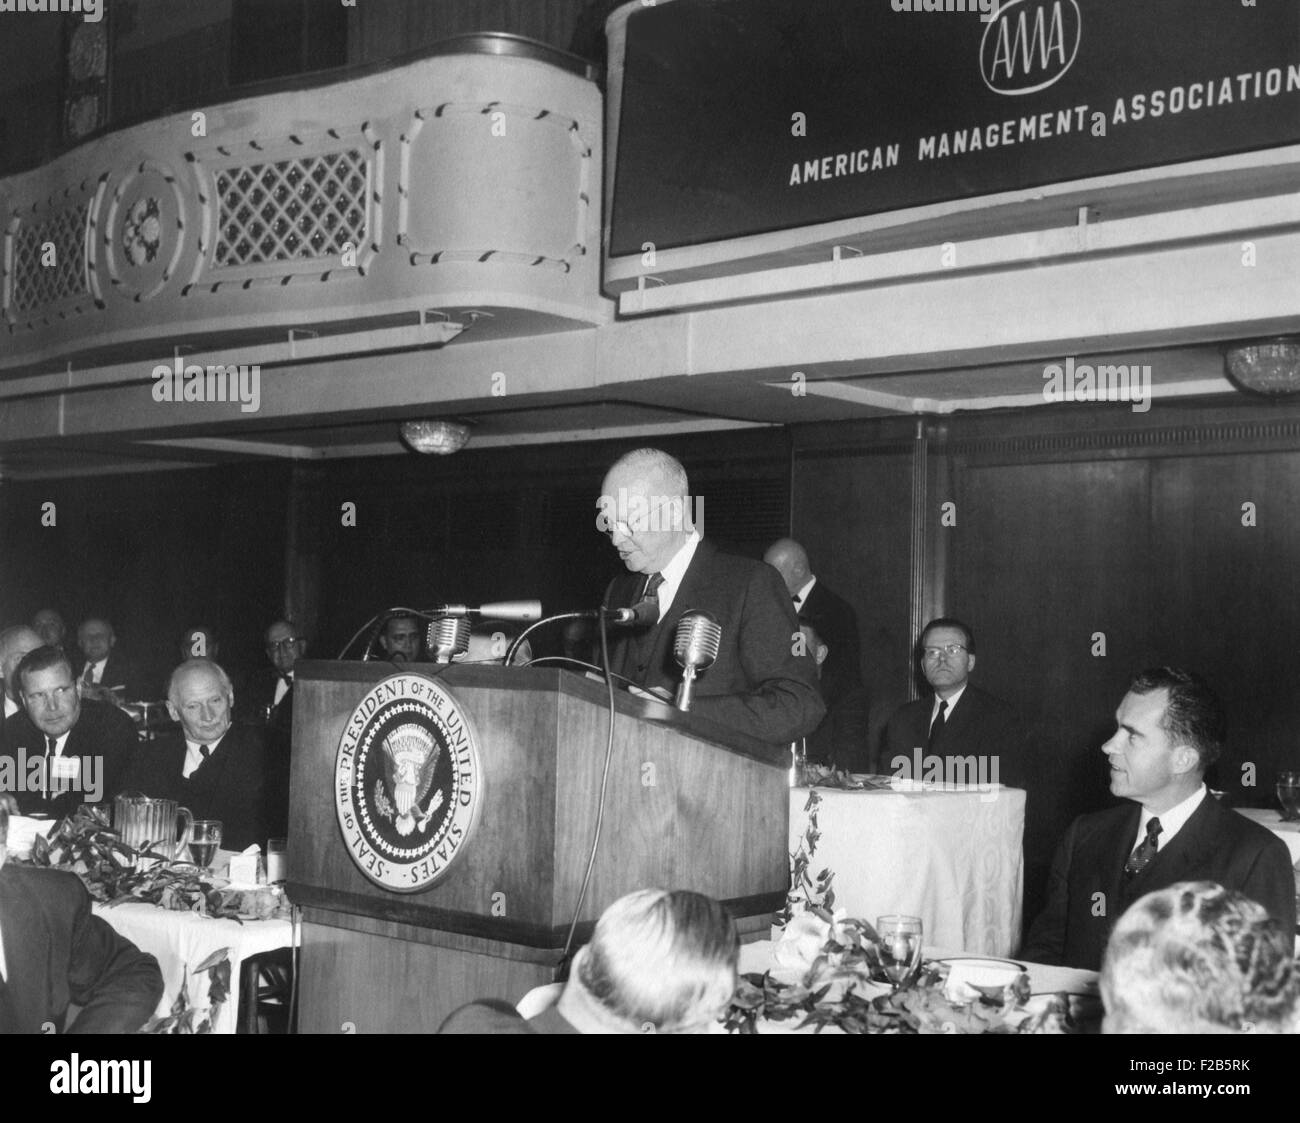 President Eisenhower speaking at American Management Association dinner. Vice President Richard Nixon is at right. Also attending was visiting World War 2 British Field Marshall Montgomery (second from left). New York City, May 20, 1958. - (BSLOC 2014 16 75) Stock Photo